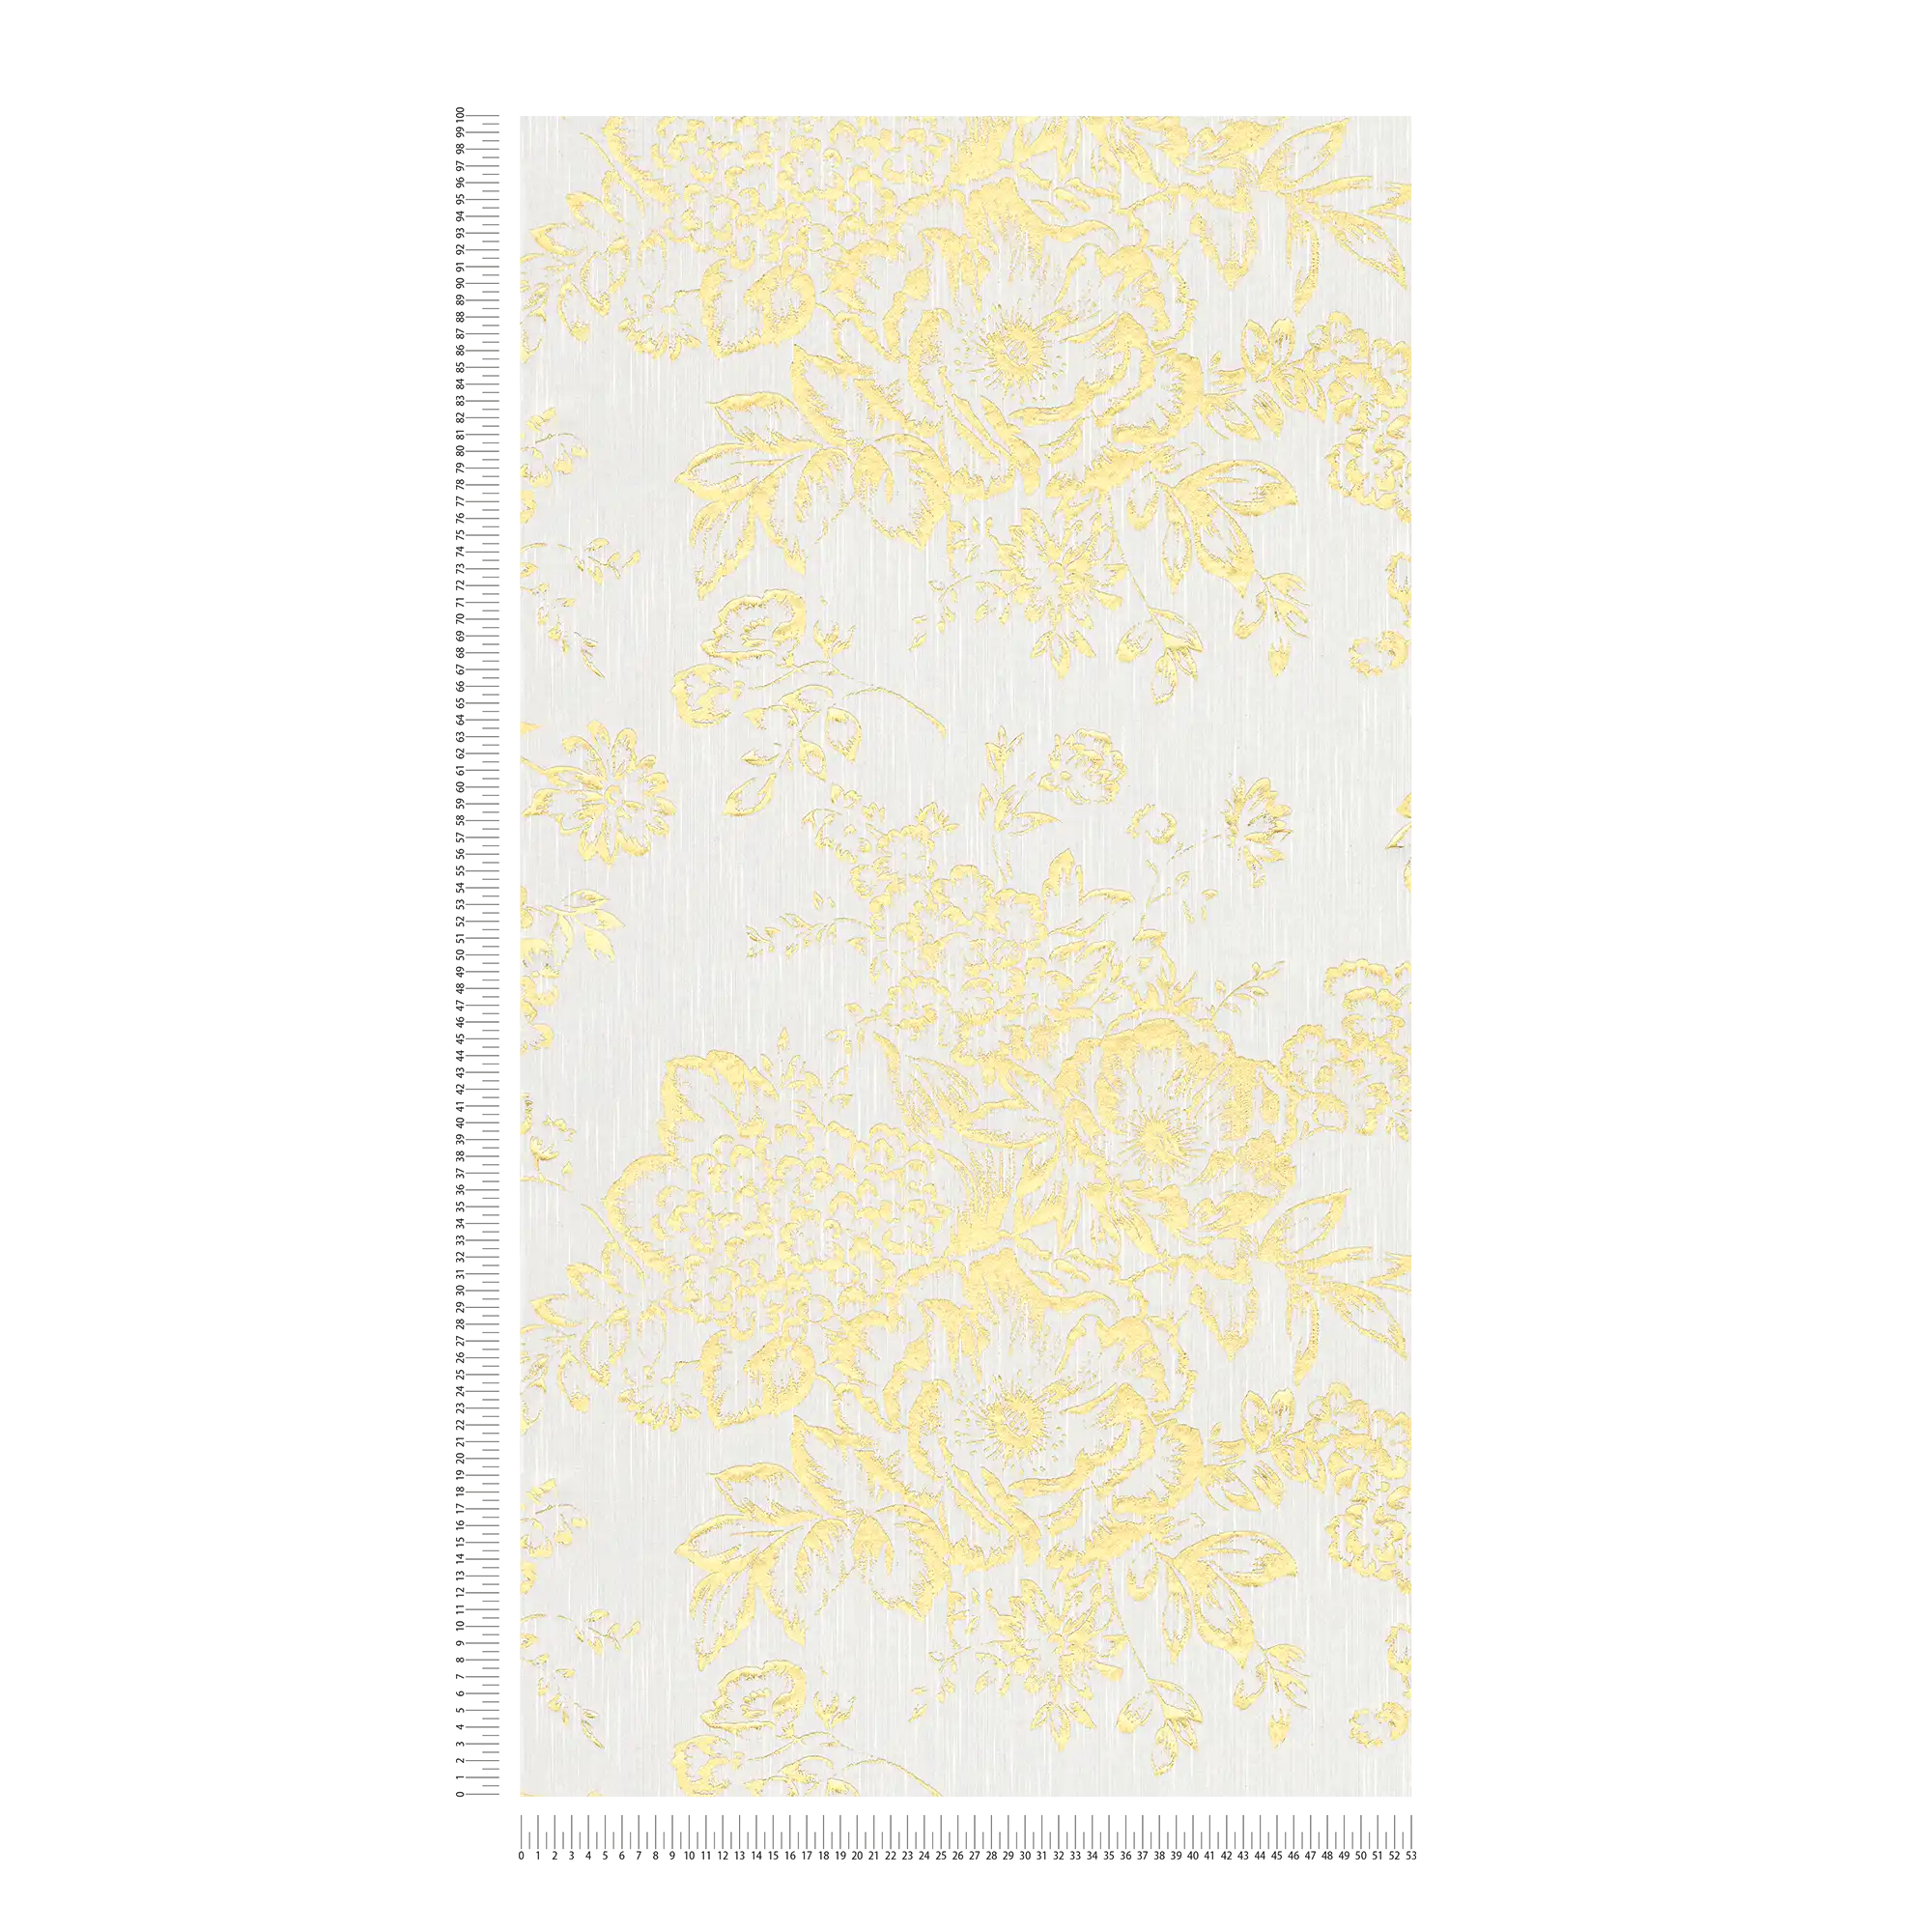             Textured wallpaper with golden floral pattern - gold, white
        